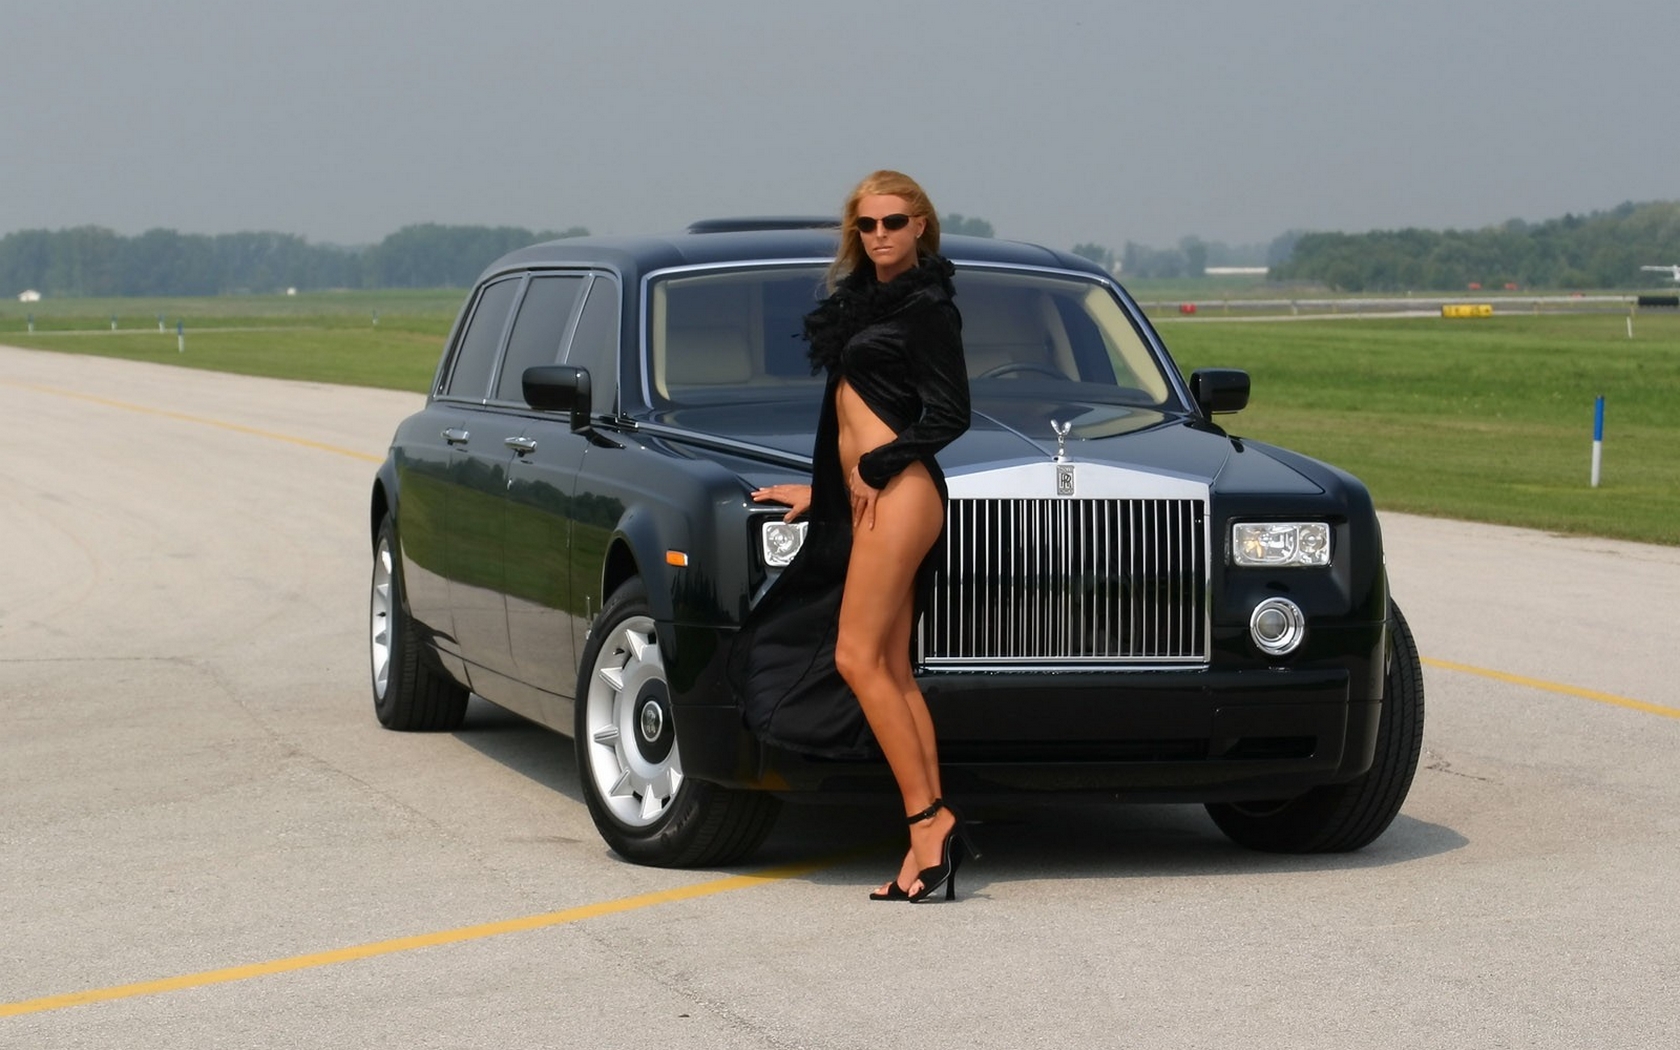 Download full size Phantom With A Chauffeur Rolls Royce wallpaper / 1680x1050